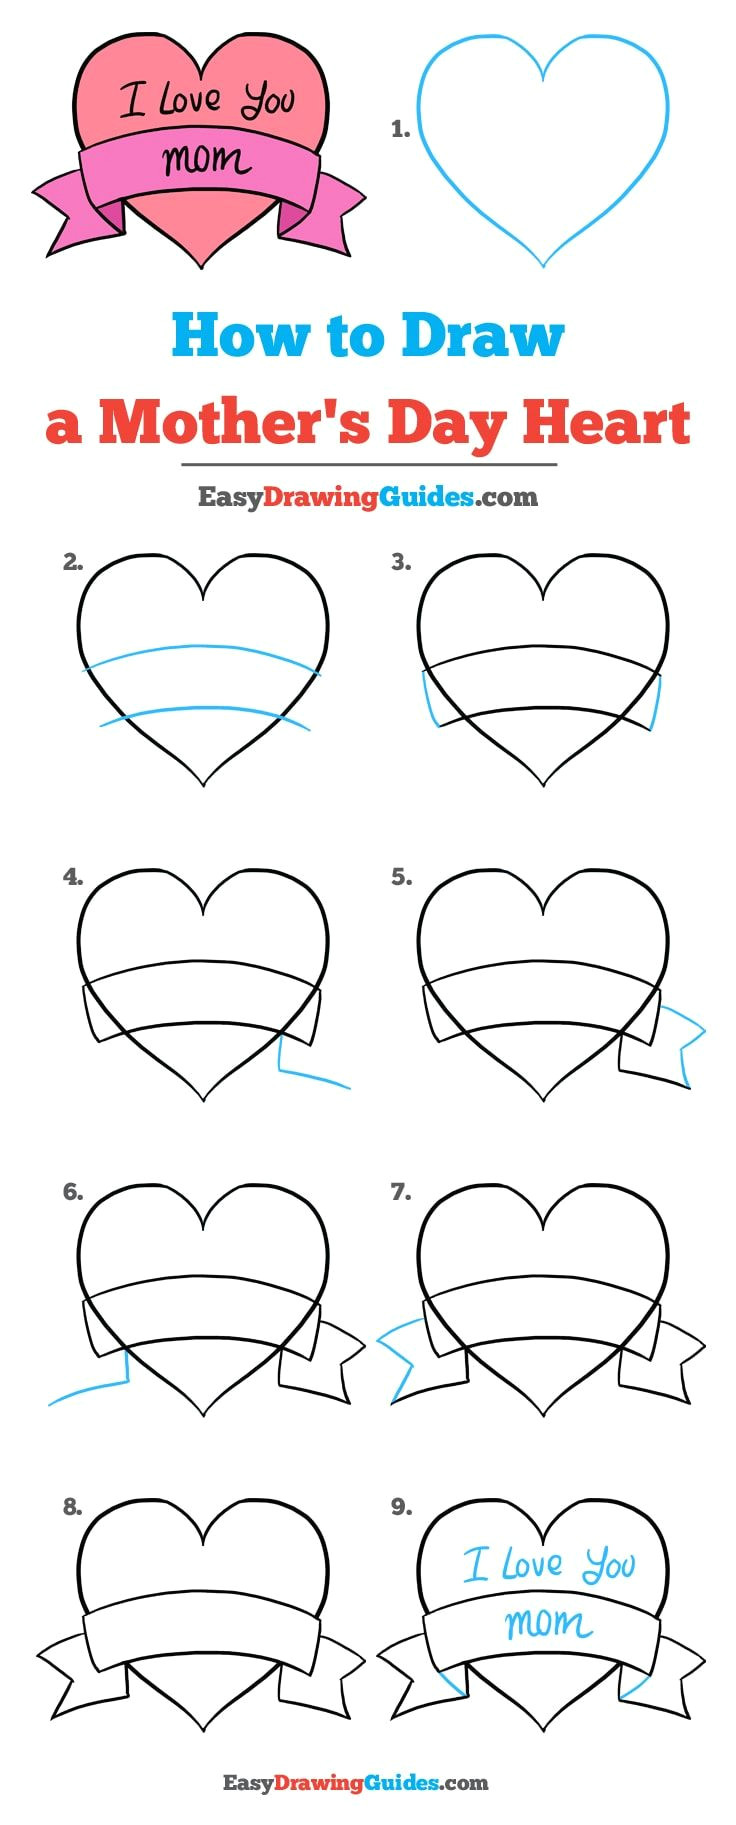 Easy Drawing On Children S Day How to Draw A Mother S Day Heart Really Easy Drawing Tutorial